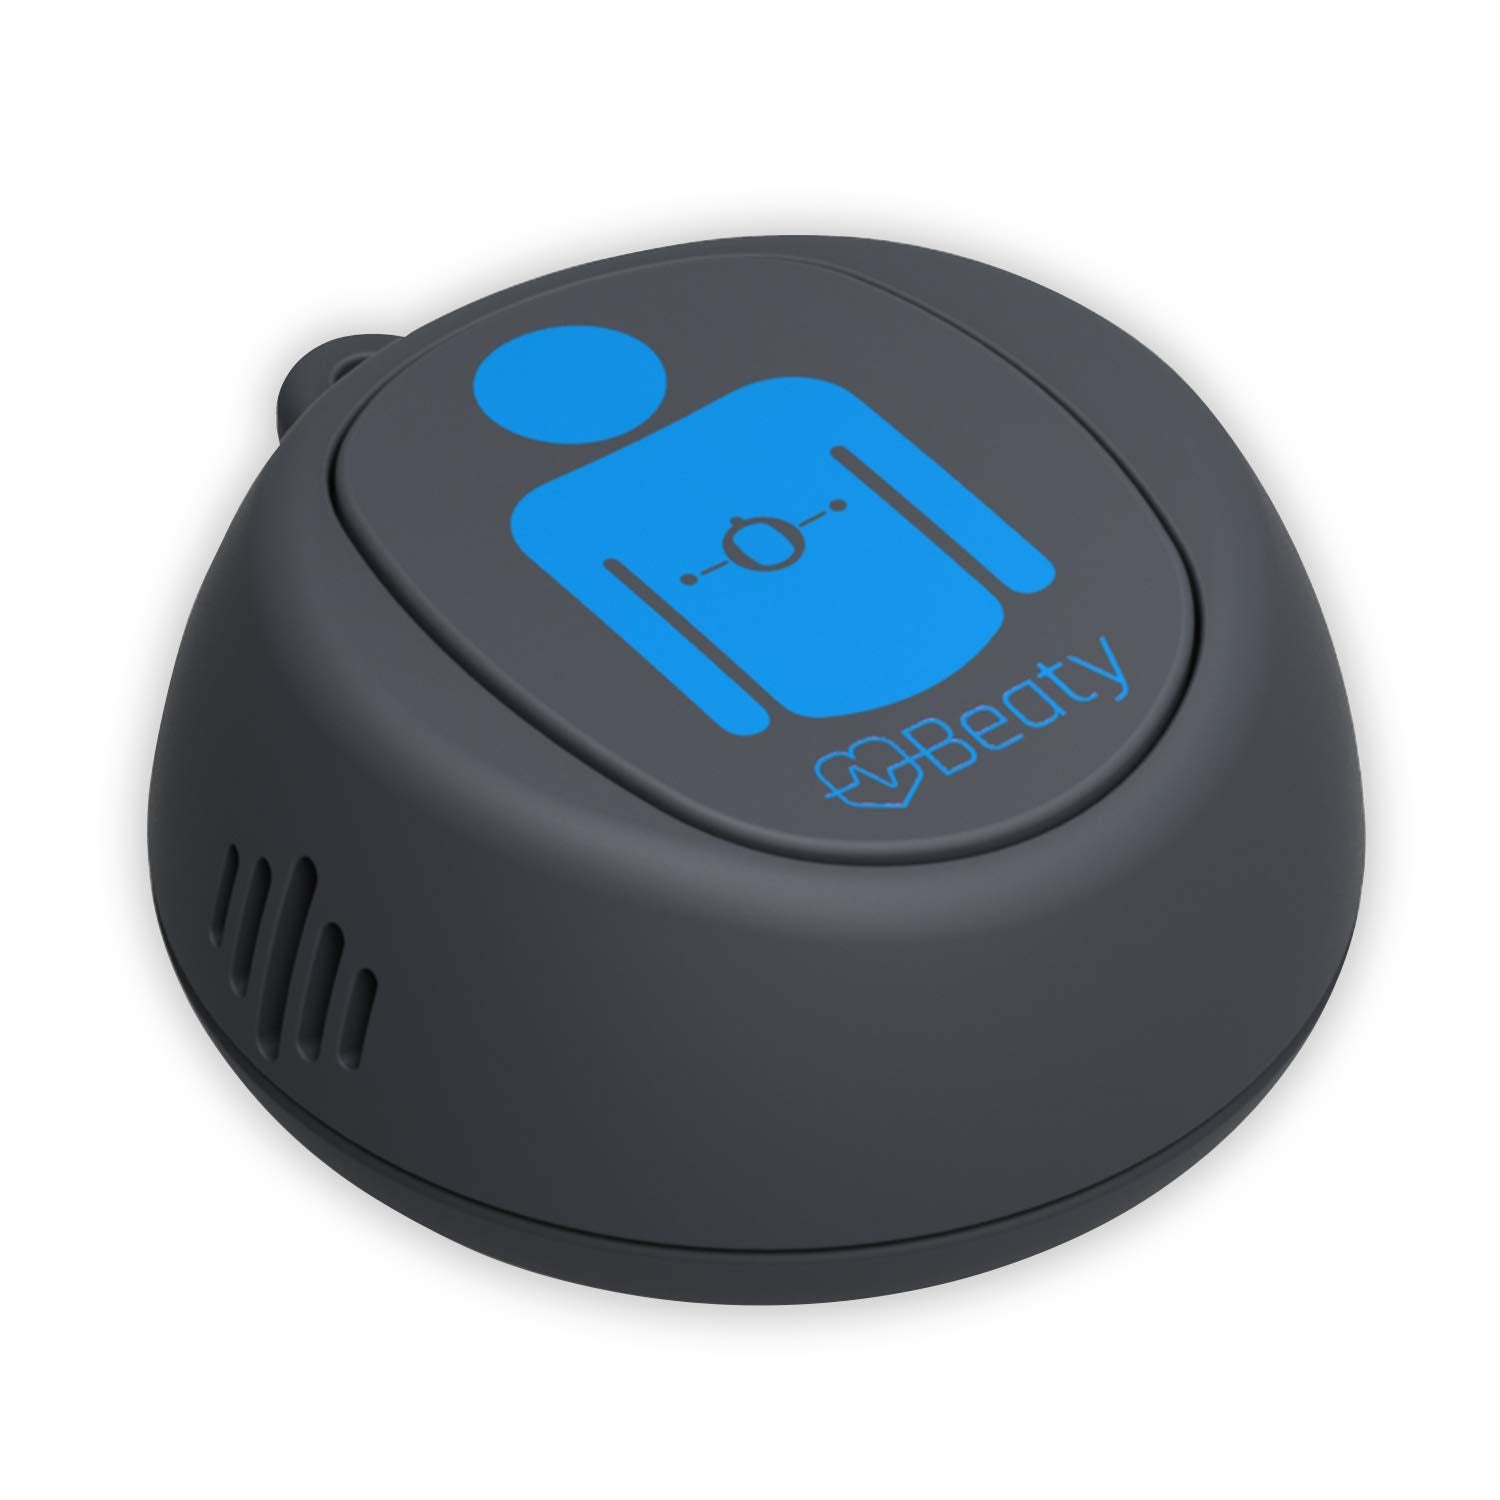 Beaty Real-Time CPR Feedback Device